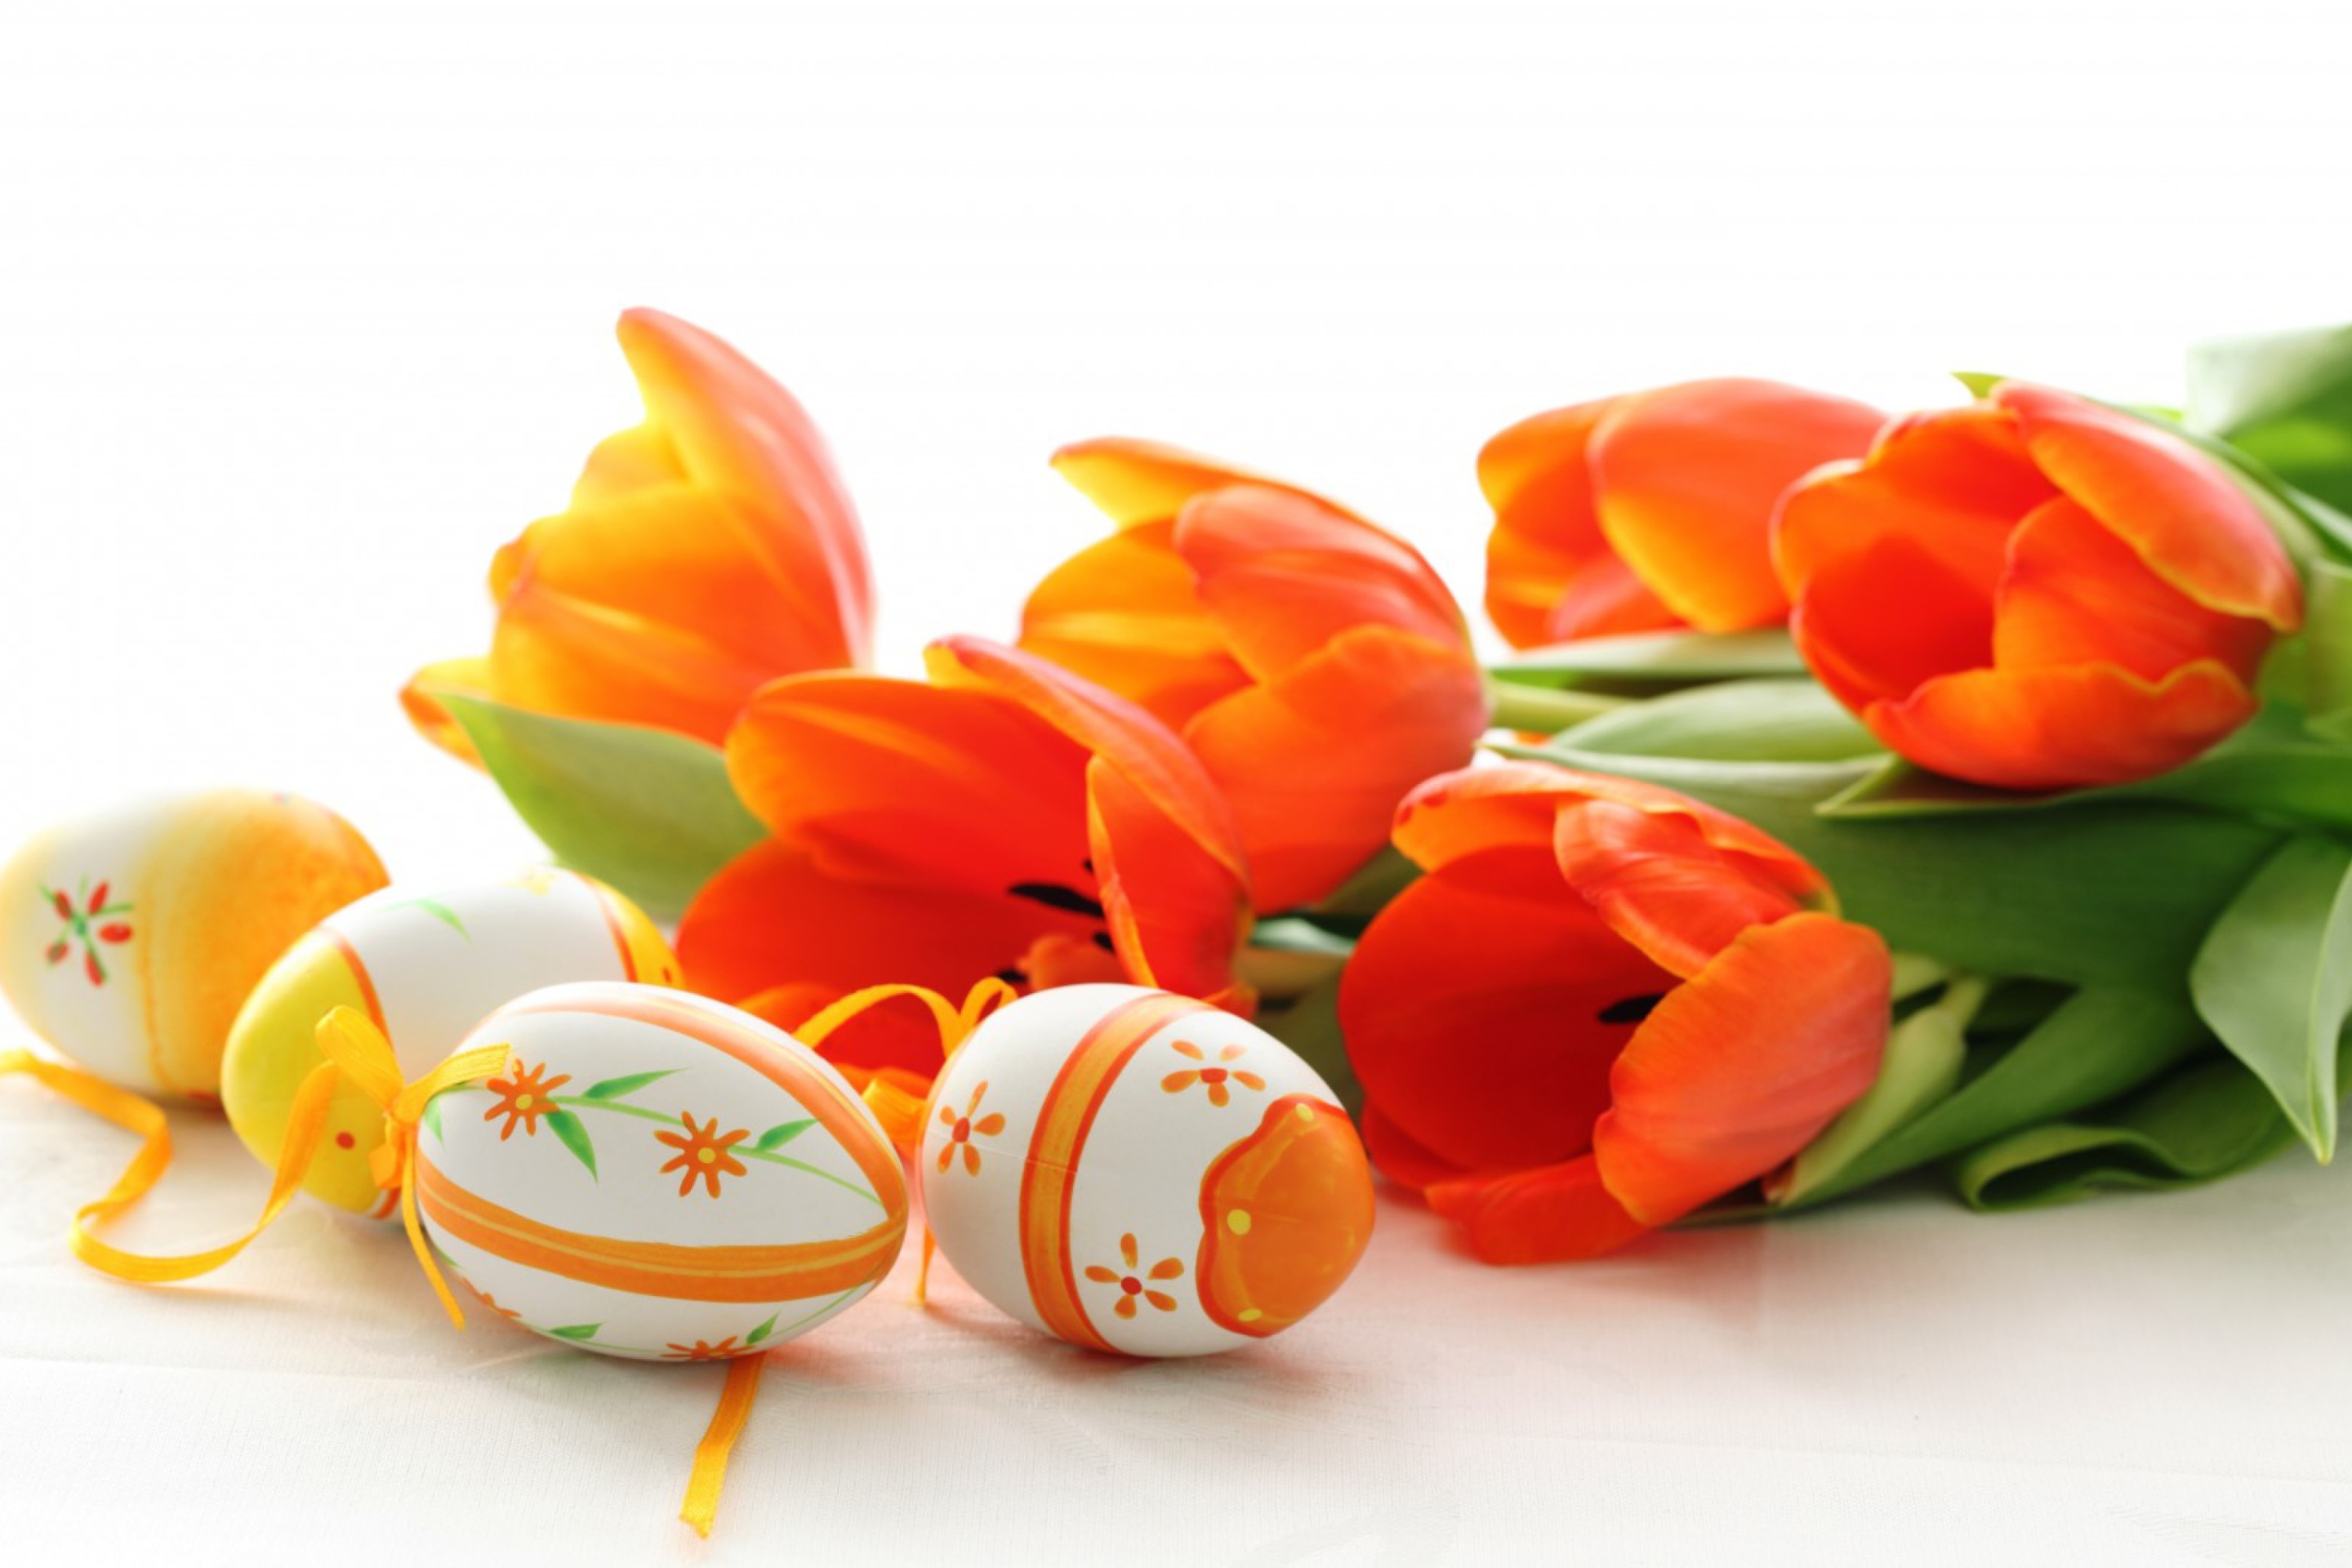 Eggs And Tulips wallpaper 2880x1920